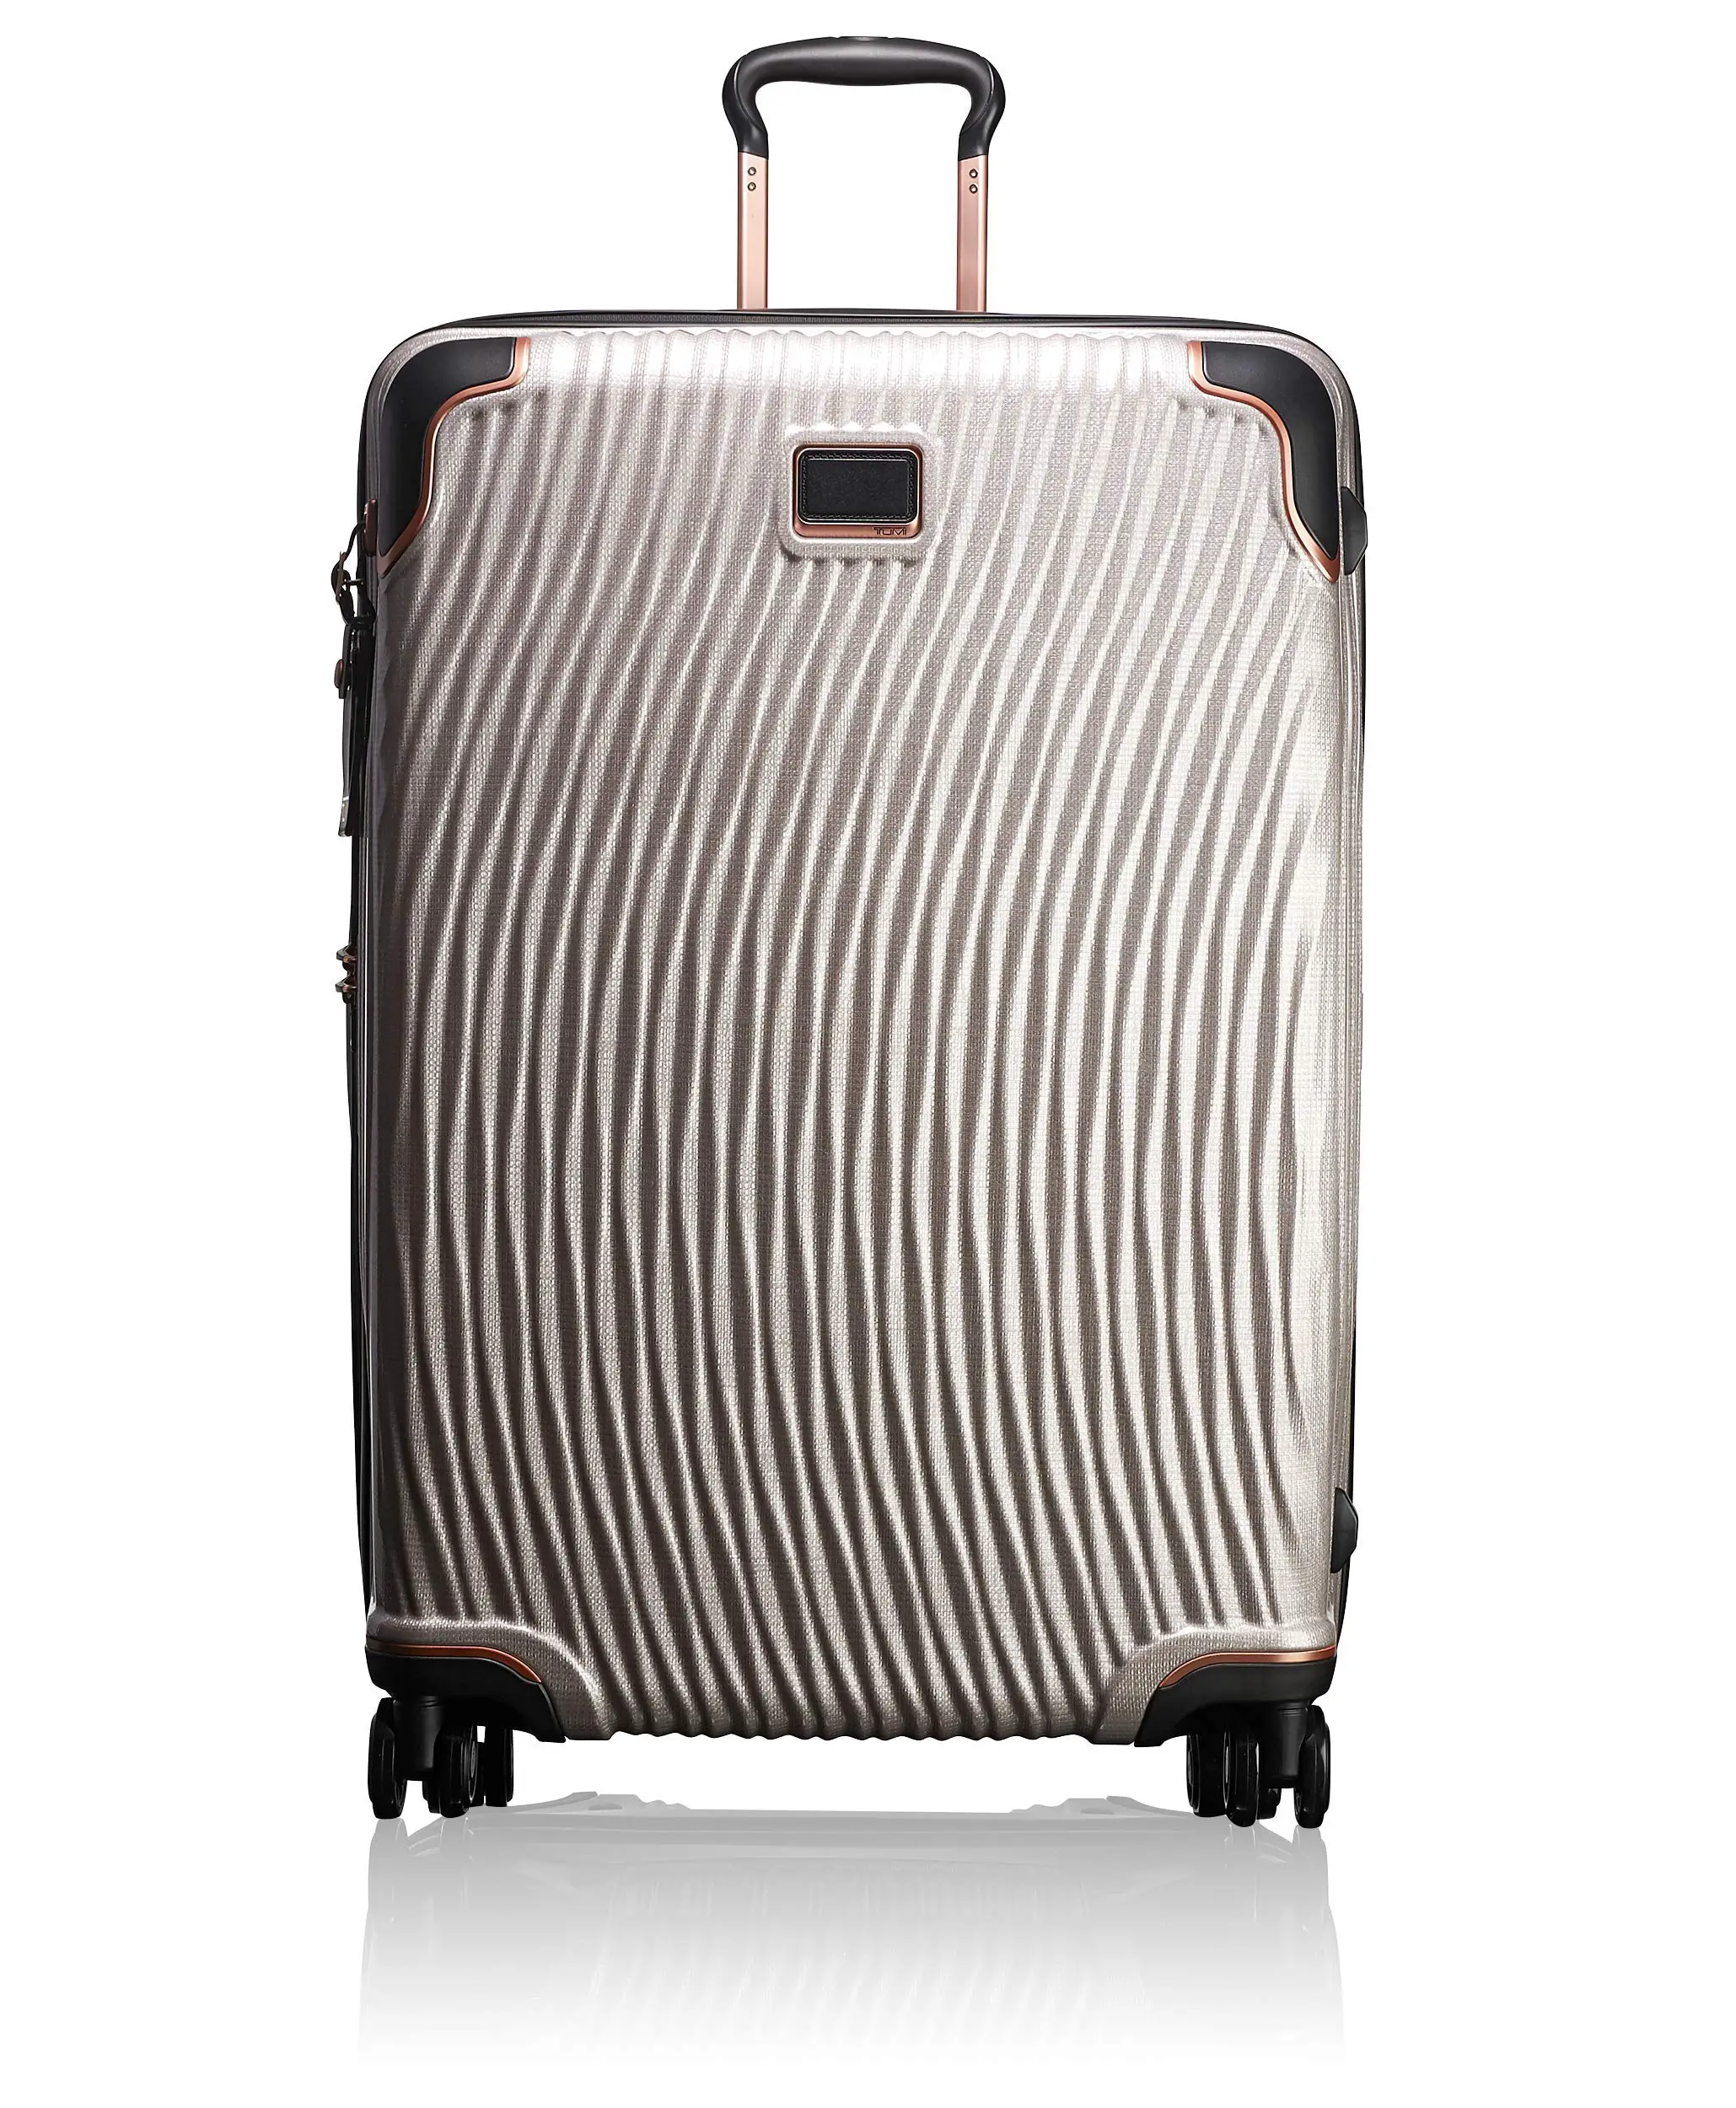 Paris Chic Style Best Travel Luggage Checked Lightweight Suitcases Four Spinner Wheels Tumi